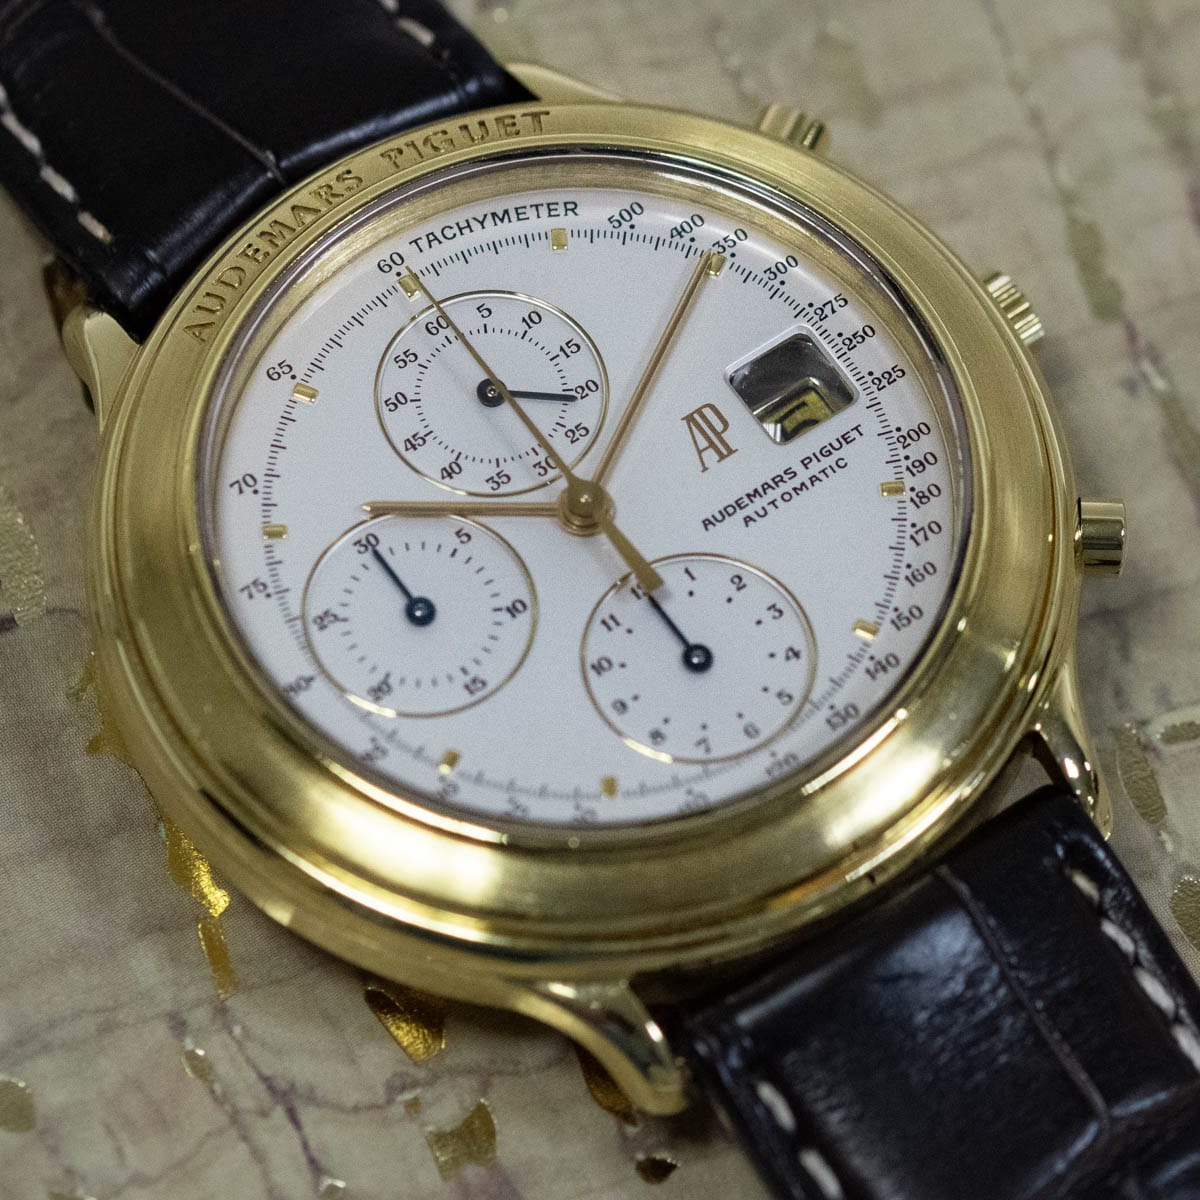 Stylied photo of  of Huitième Chronograph